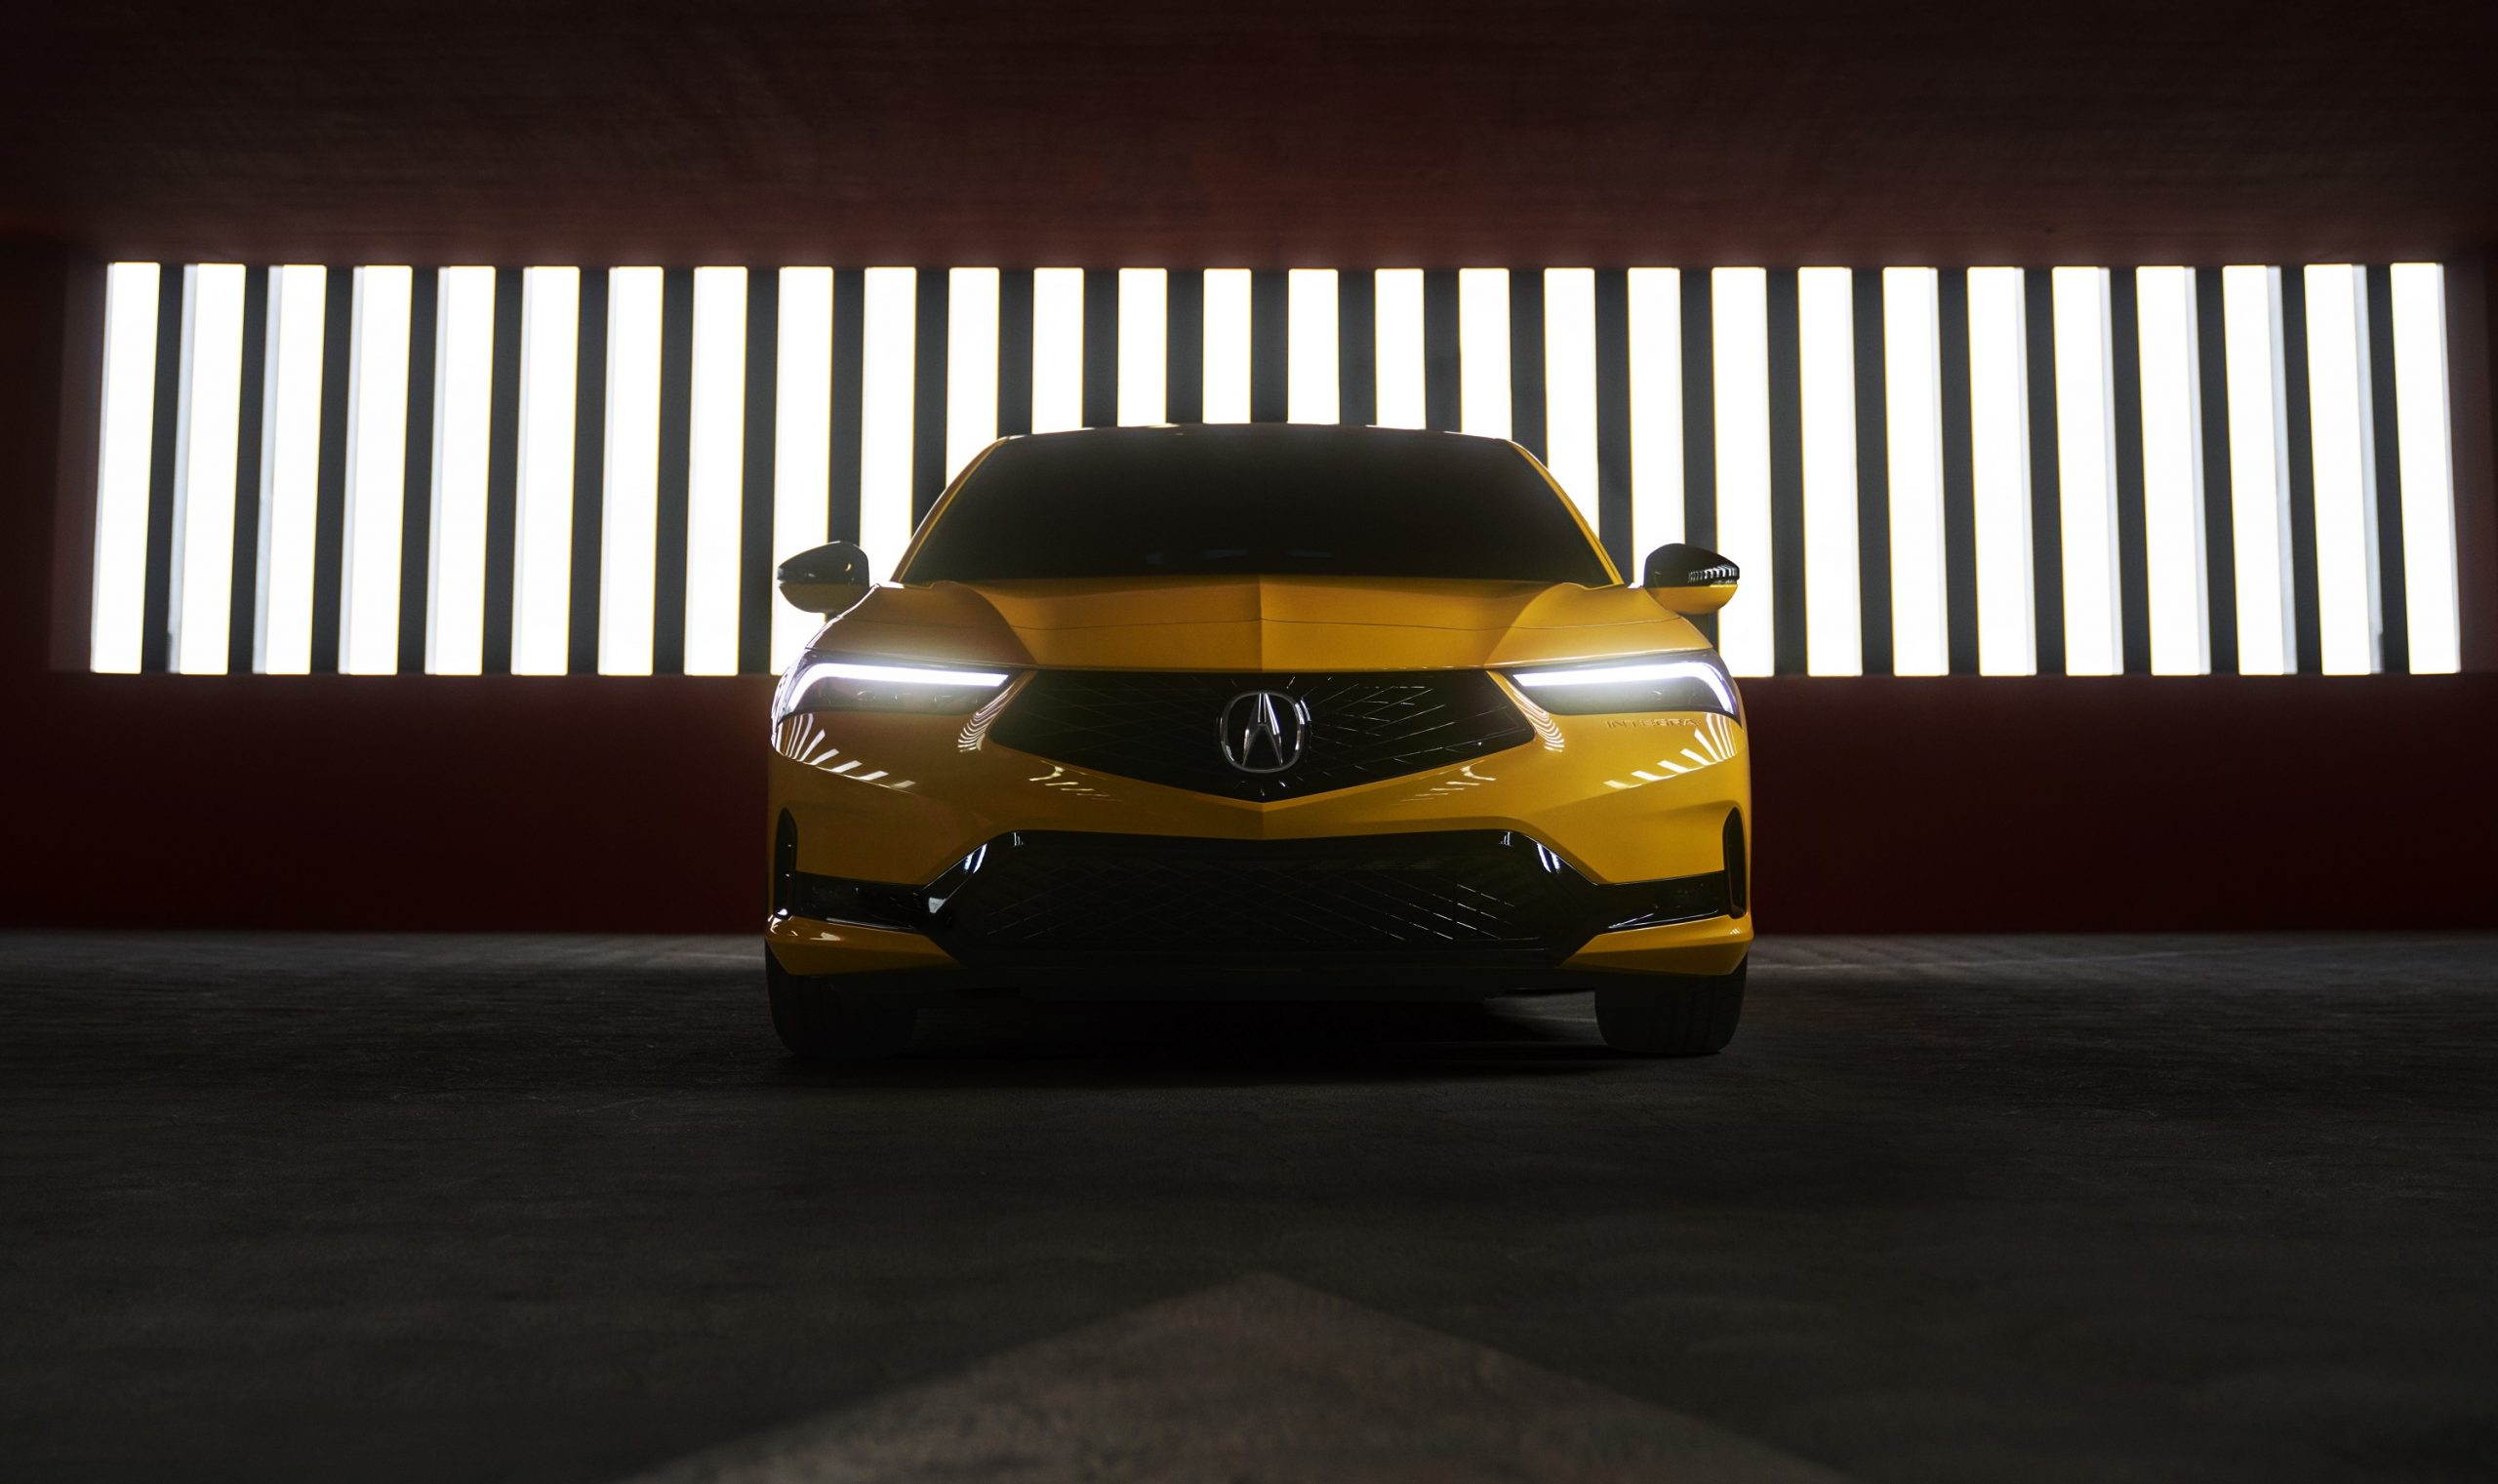 The front of the 2023 Acura Integra in yellow